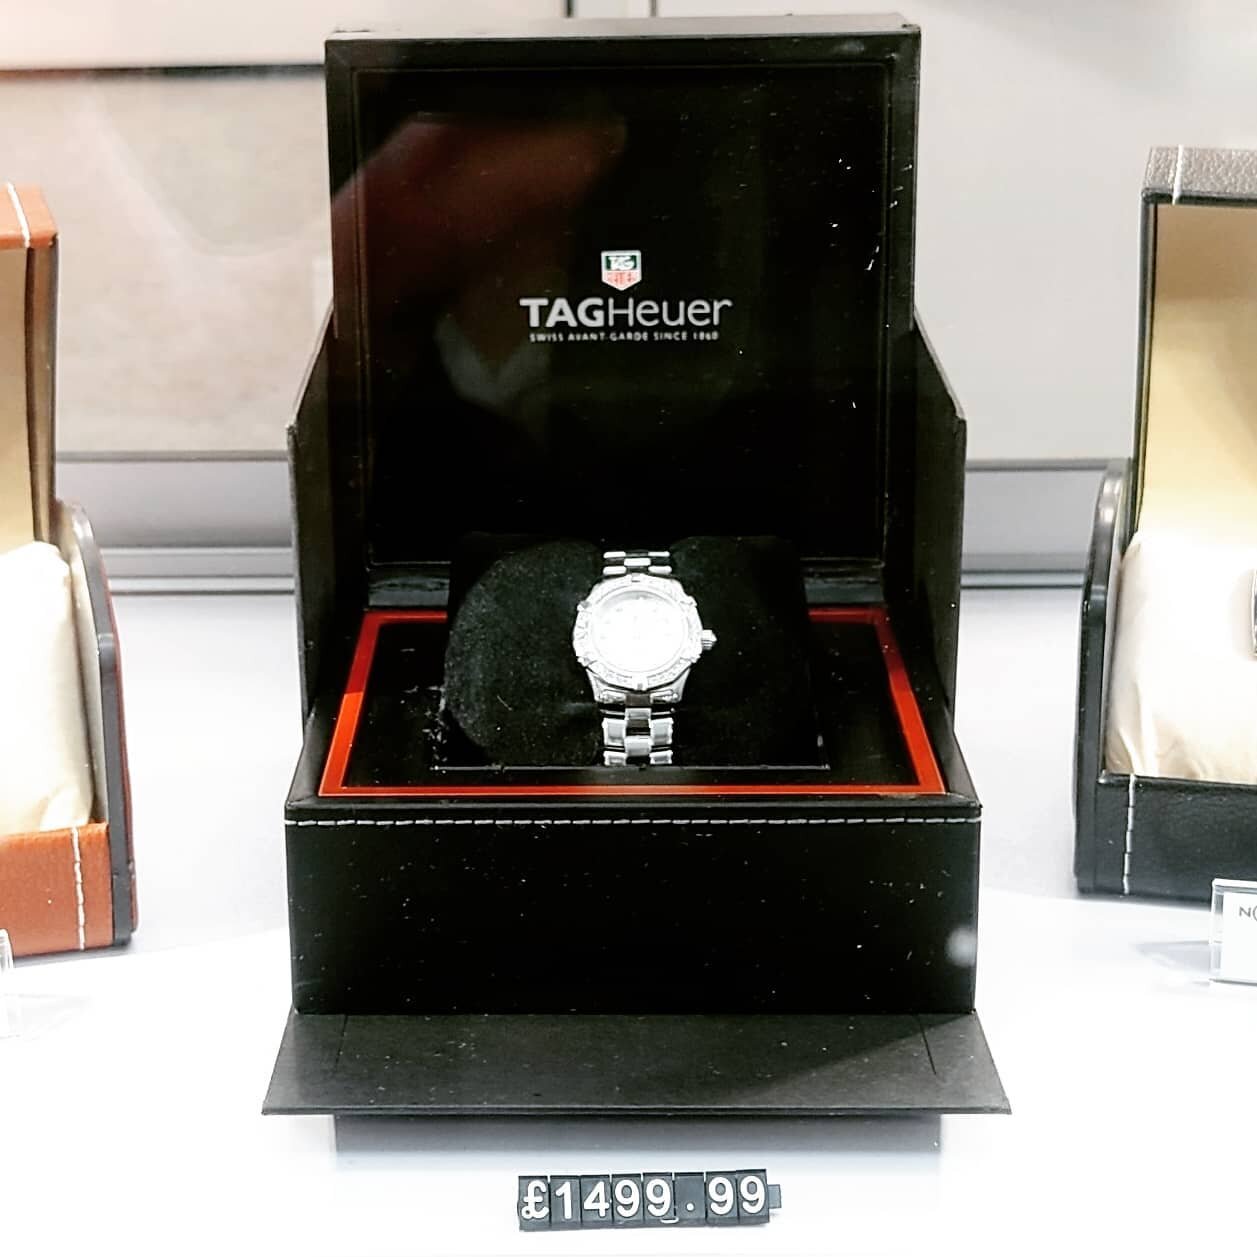 Looking for something for that special lady in your life? We have a range of high quality ladies watches in excellent condition in time for Christmas. In our City Centre store and online shop. #watches #watchesofinstagram #nottingham #notts #watchrep